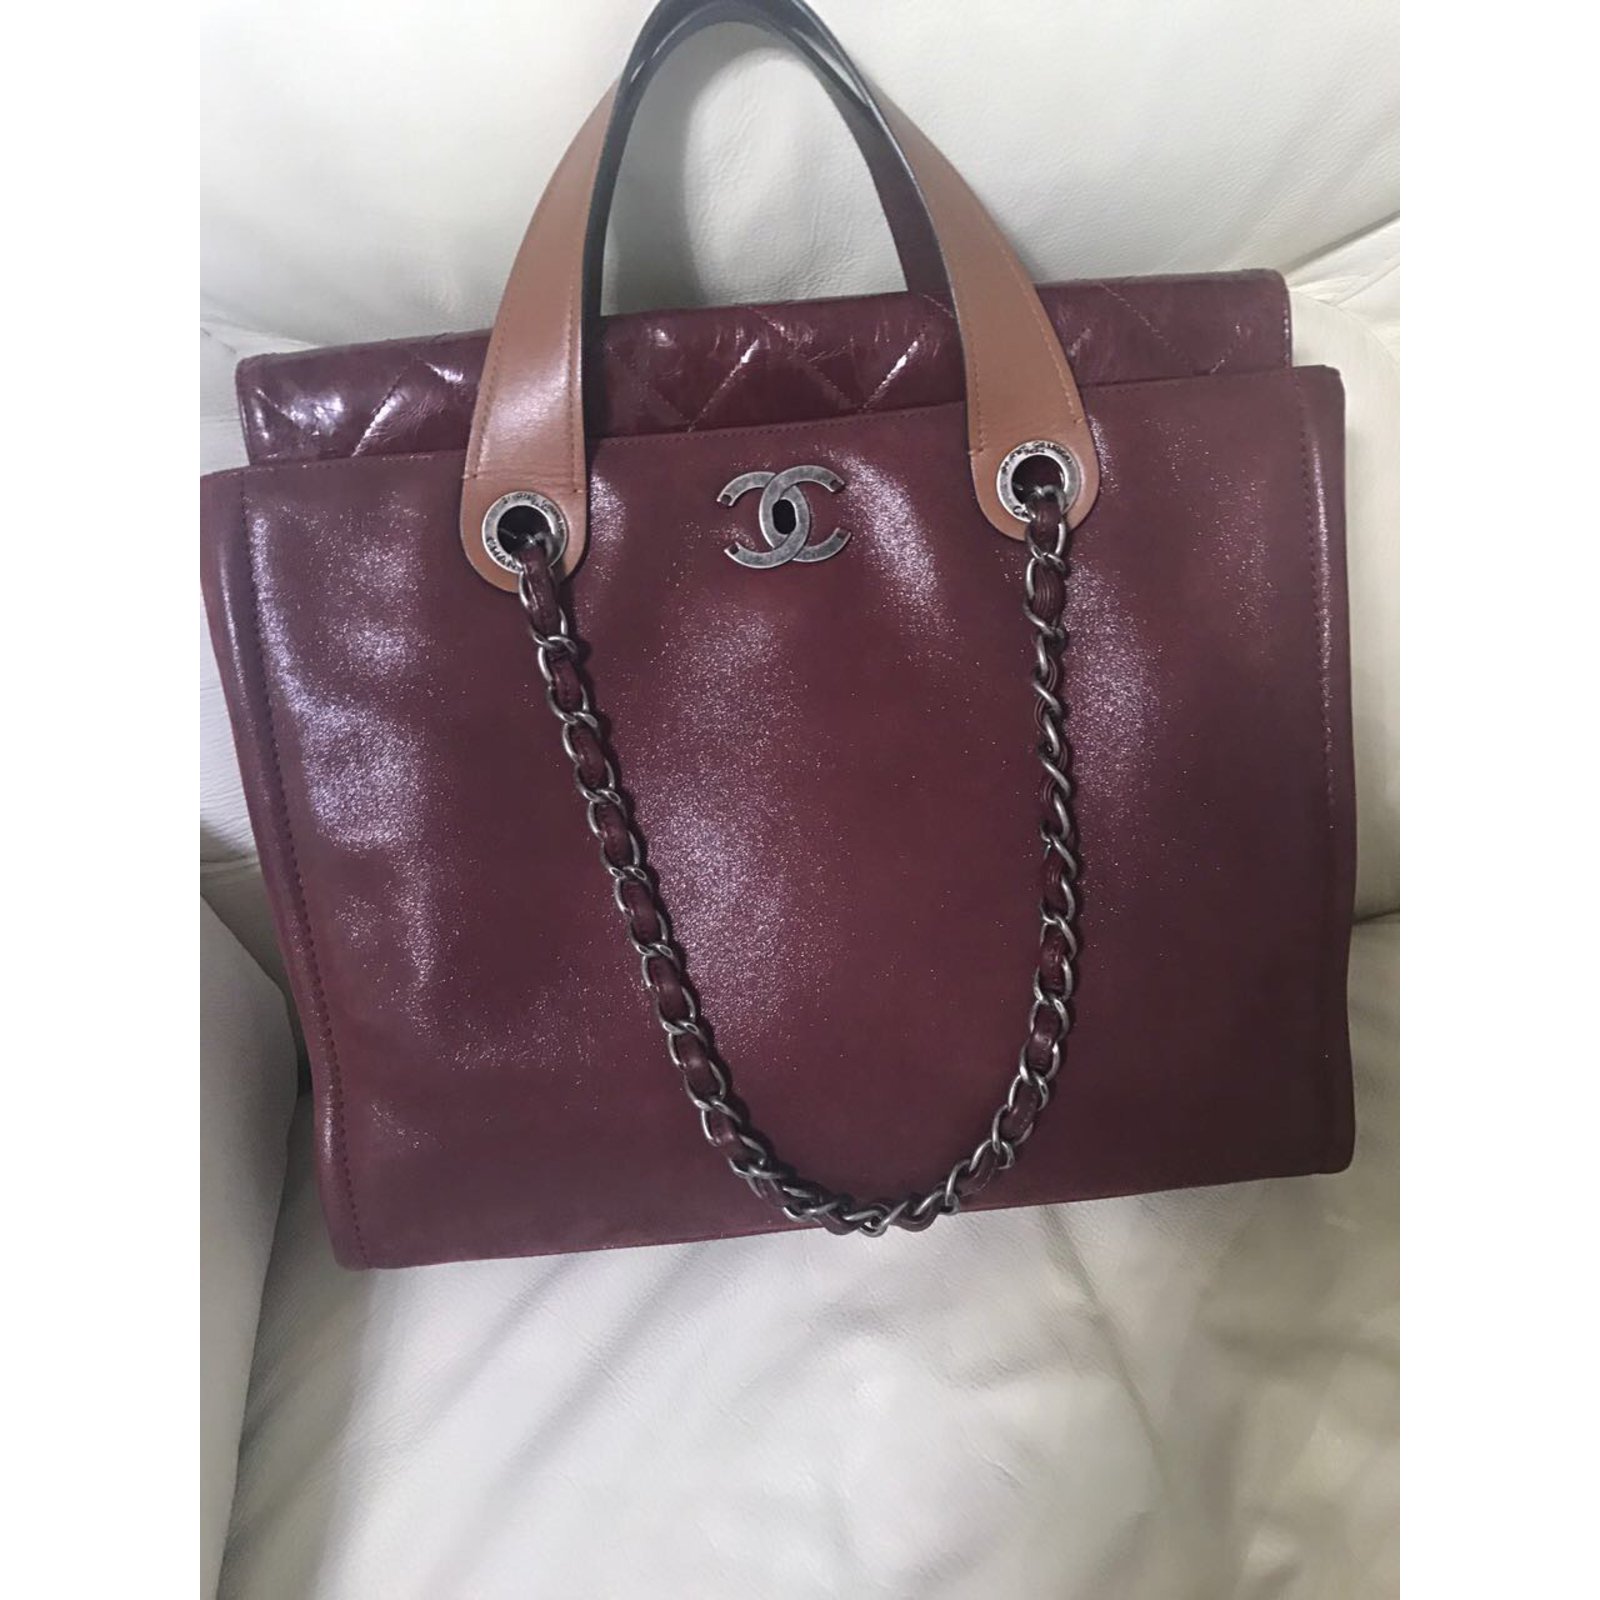 Chanel Iridescent Calfskin Leather In The Mix Tote Brown with